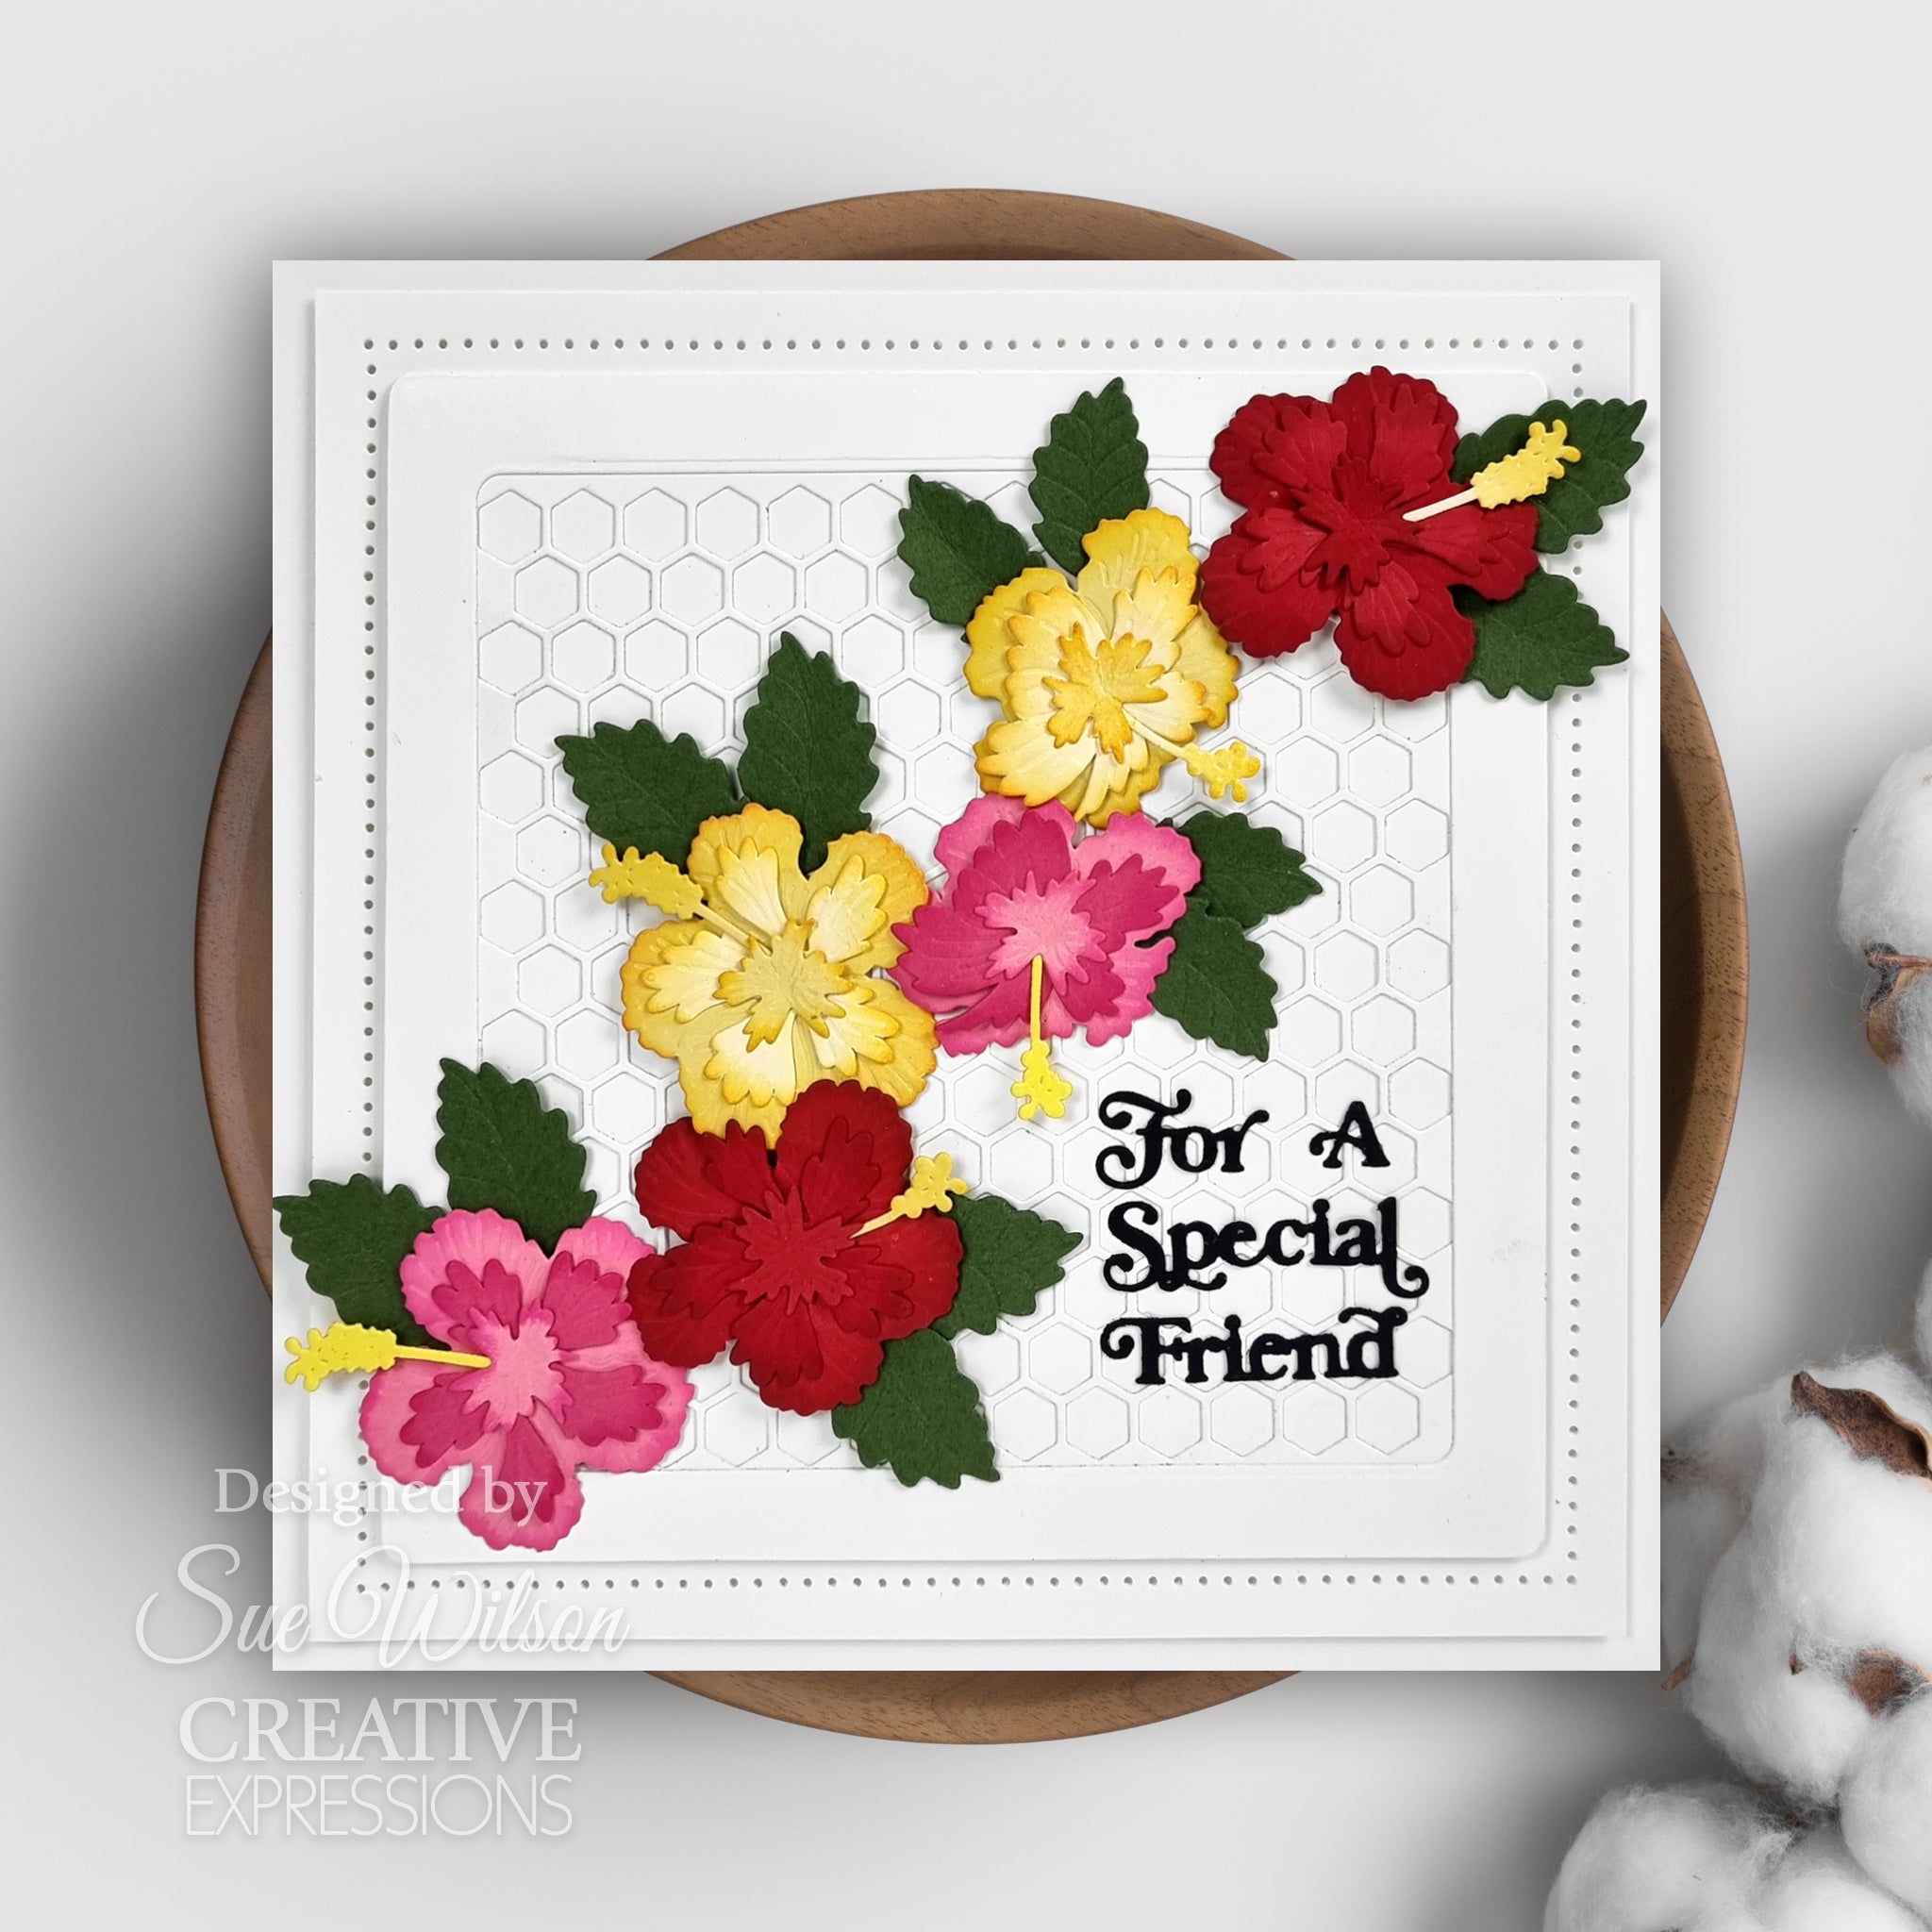 Creative Expressions Sue Wilson Layered Flowers Collection Hibiscus Craft Die